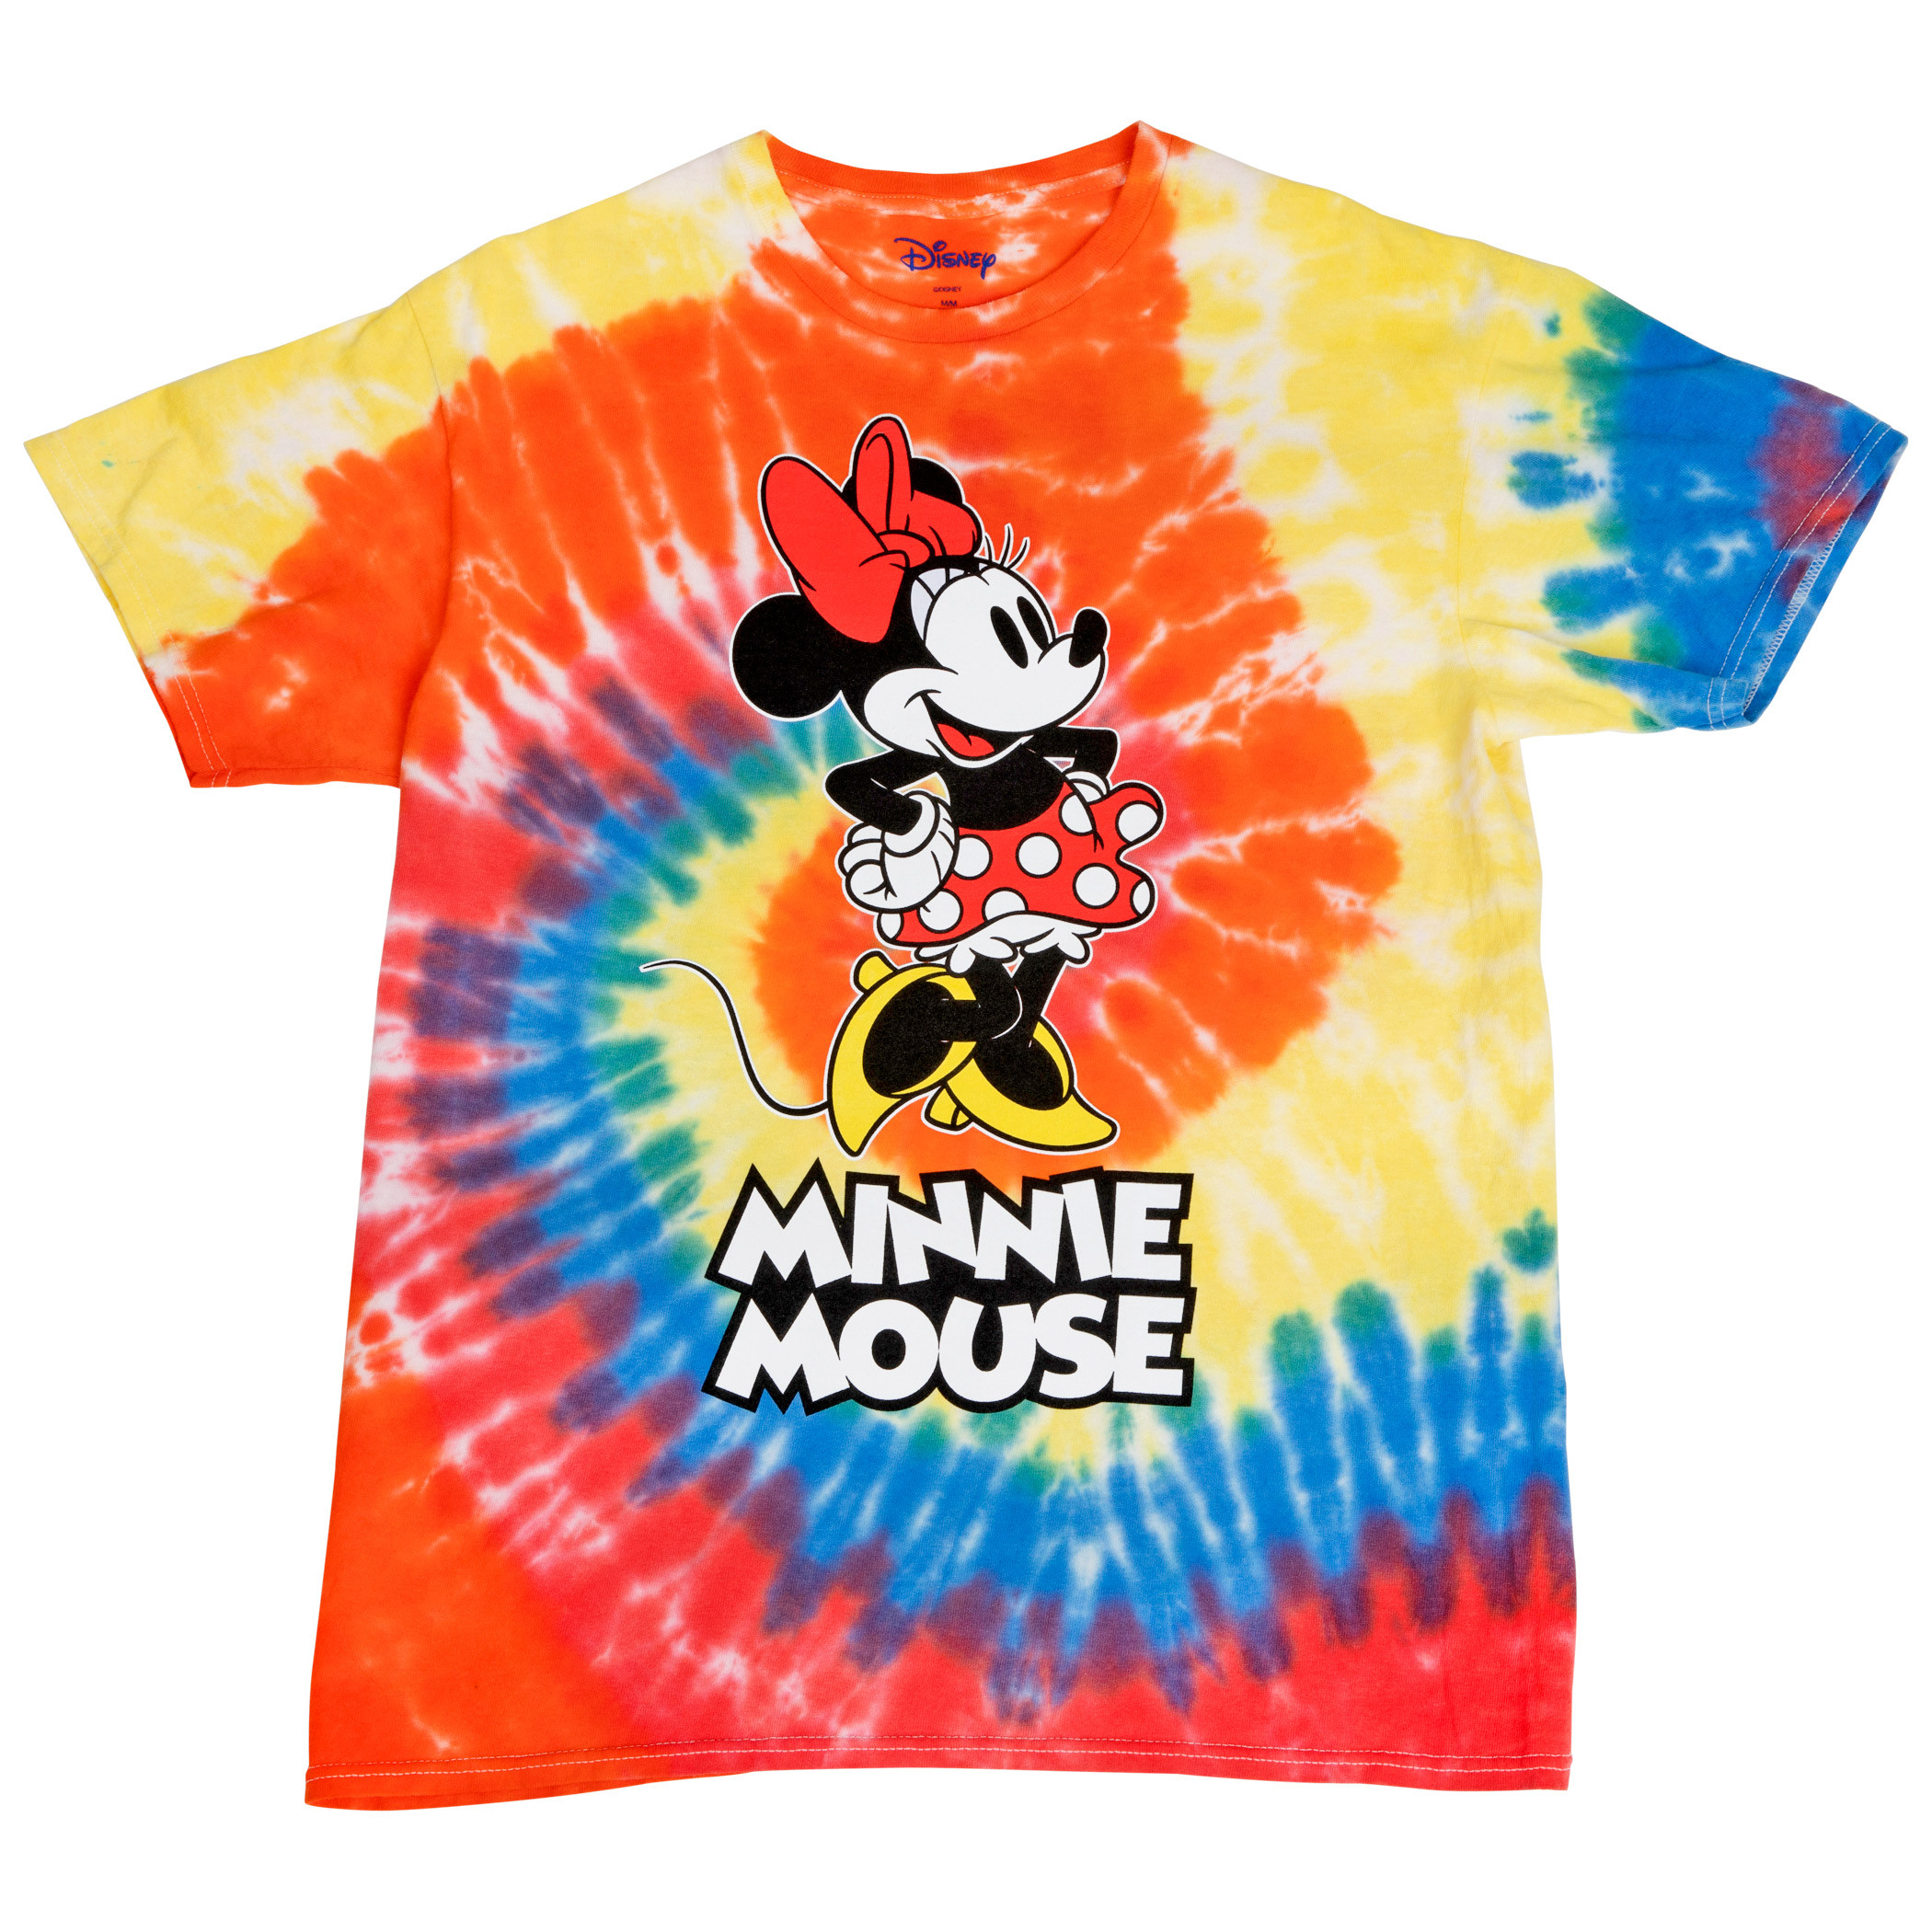 Minnie Mouse Character Women's Tie Dye T-Shirt